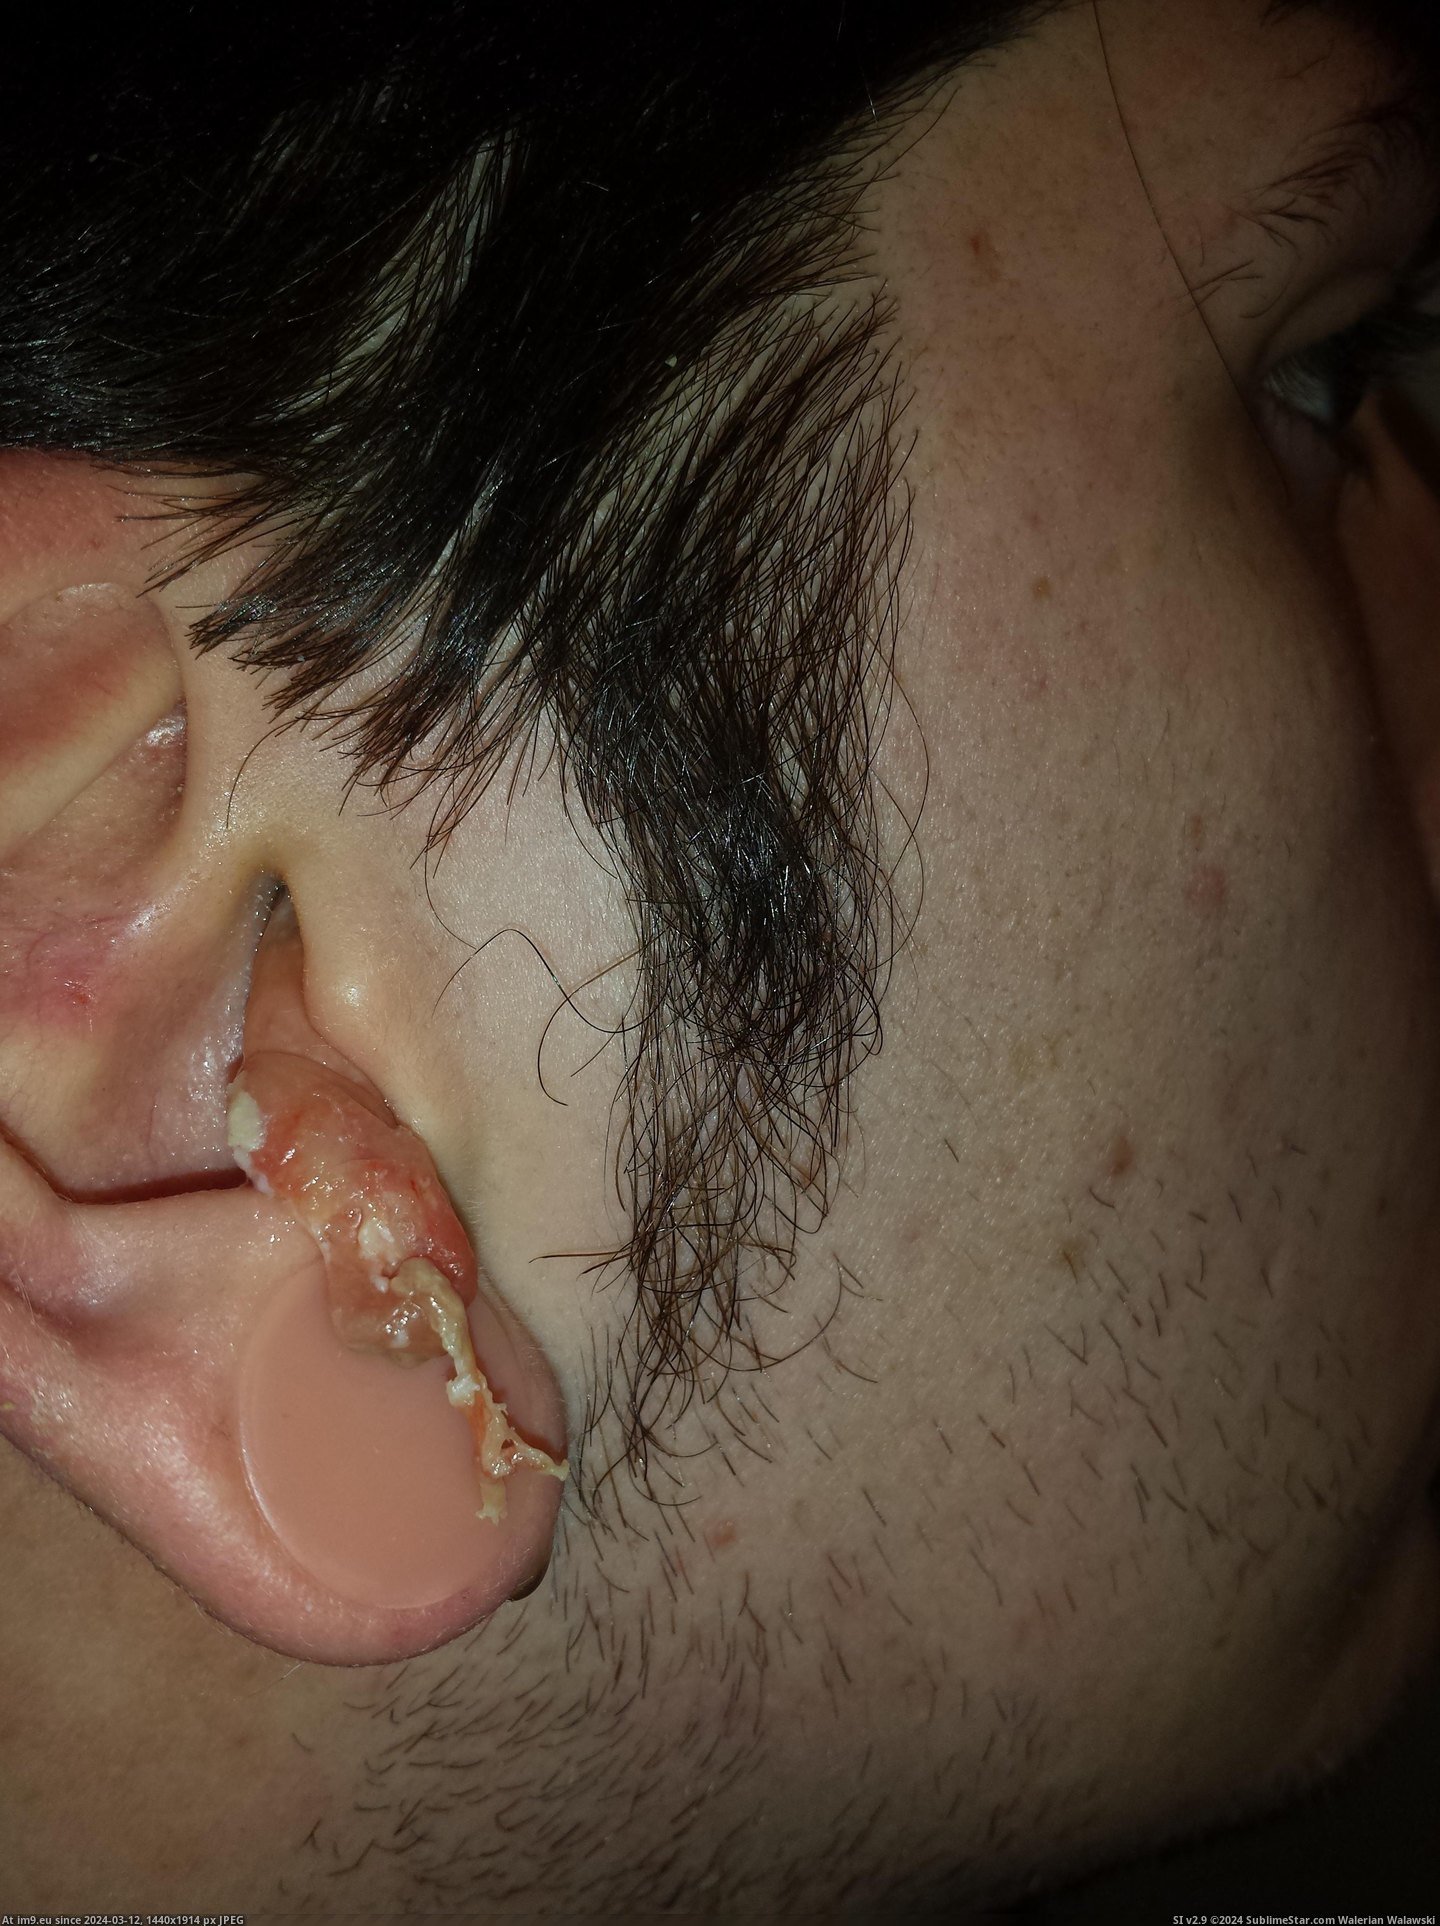 #Wtf #Ear #Infection #Crazy [Wtf] My crazy ear infection 9 Pic. (Image of album My r/WTF favs))